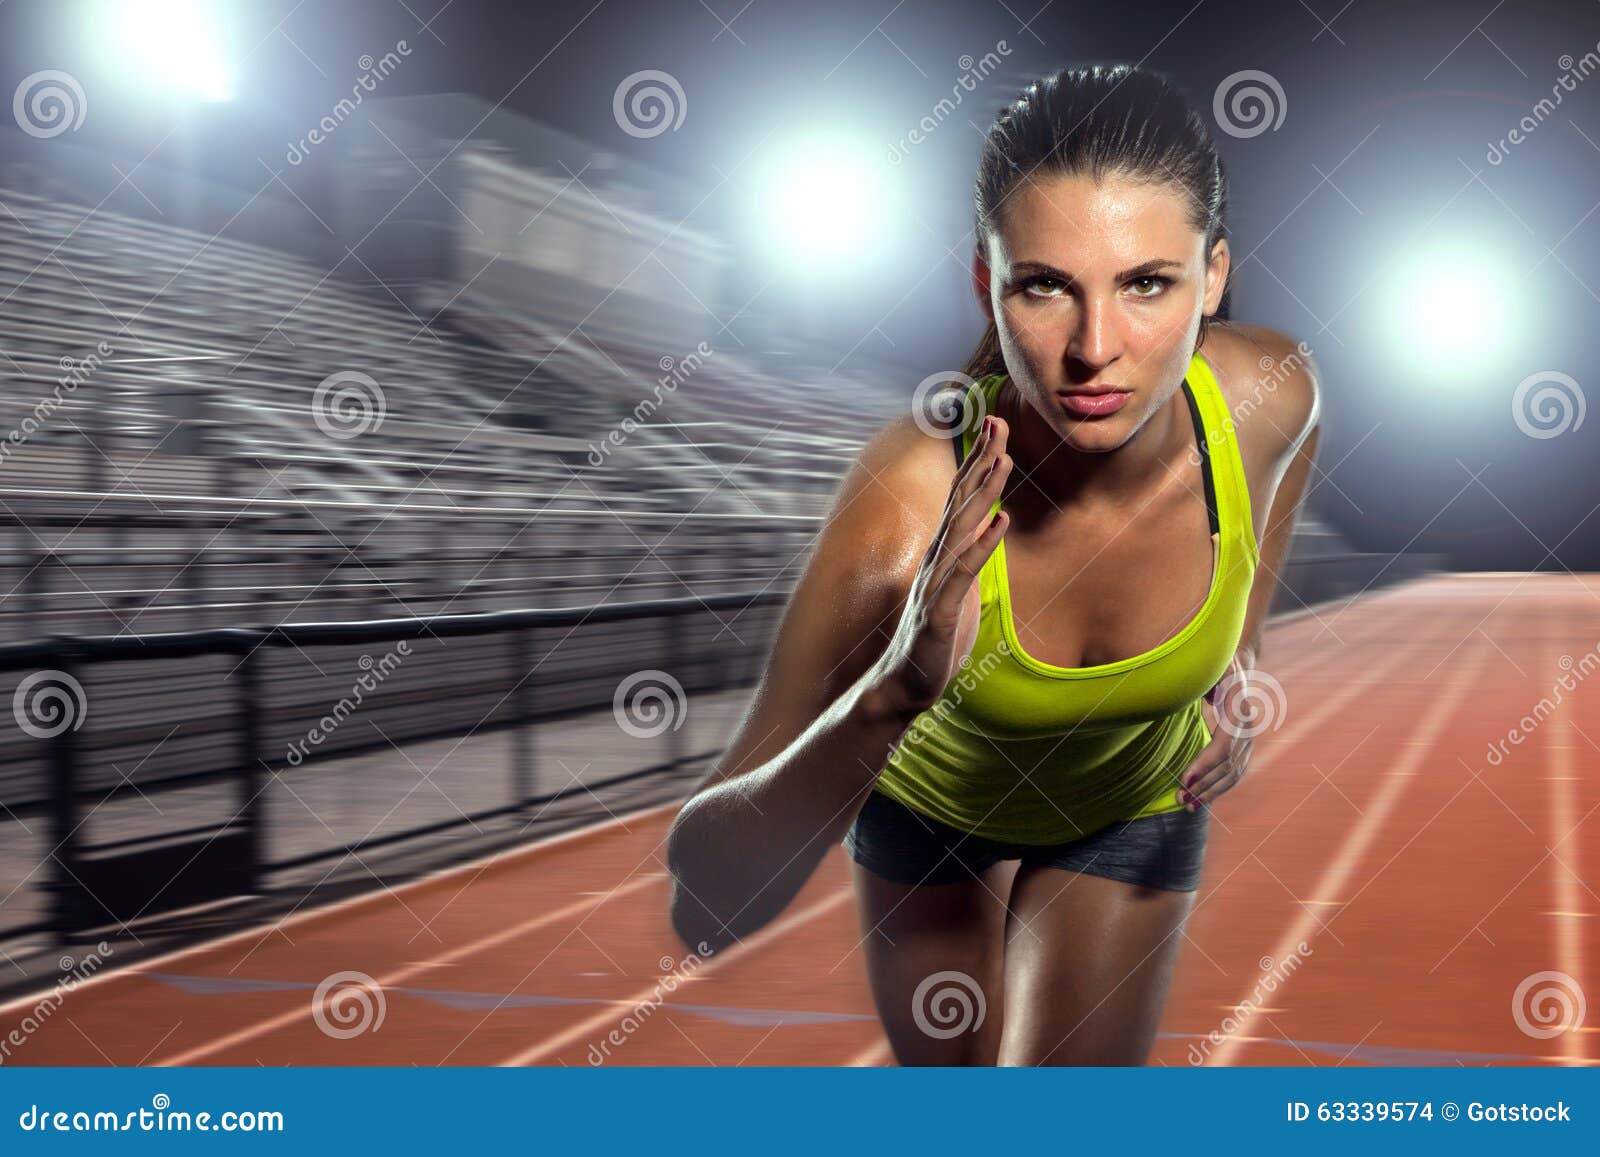 Portrait of a female athlete on a black background. Woman sprinter